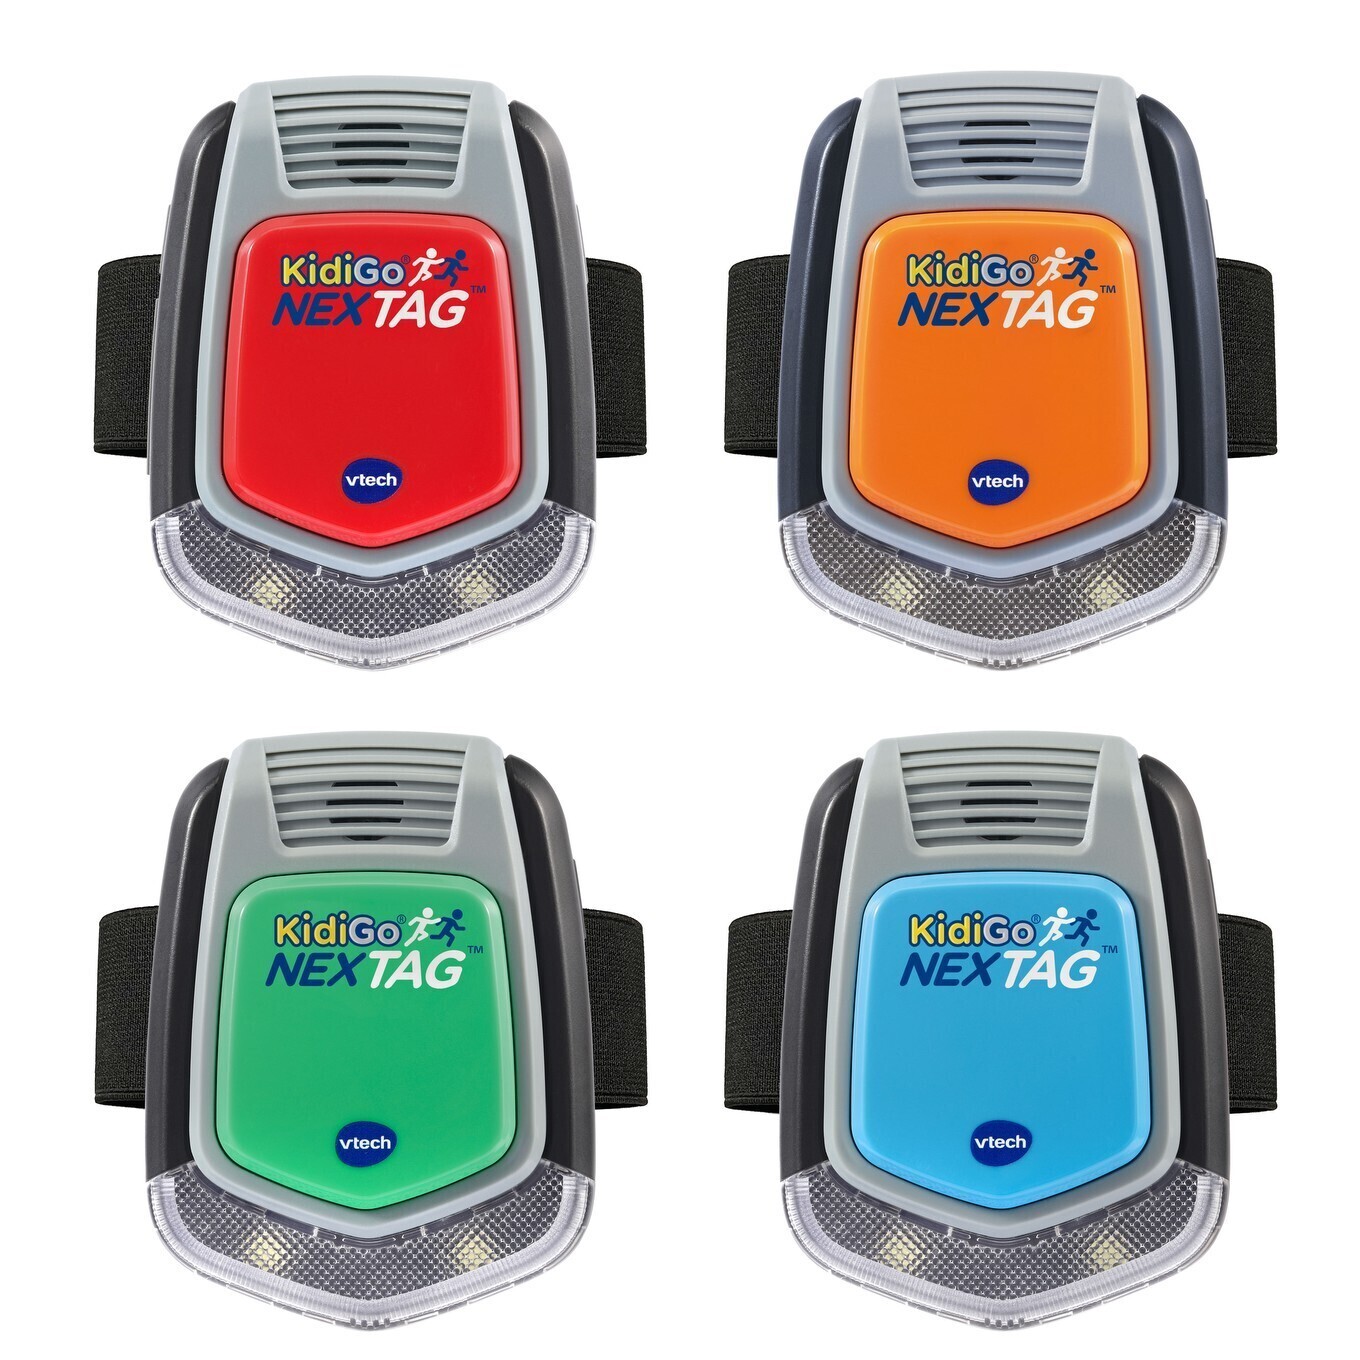 KidiGear  Keep in touch indoors and out, at home or on the go